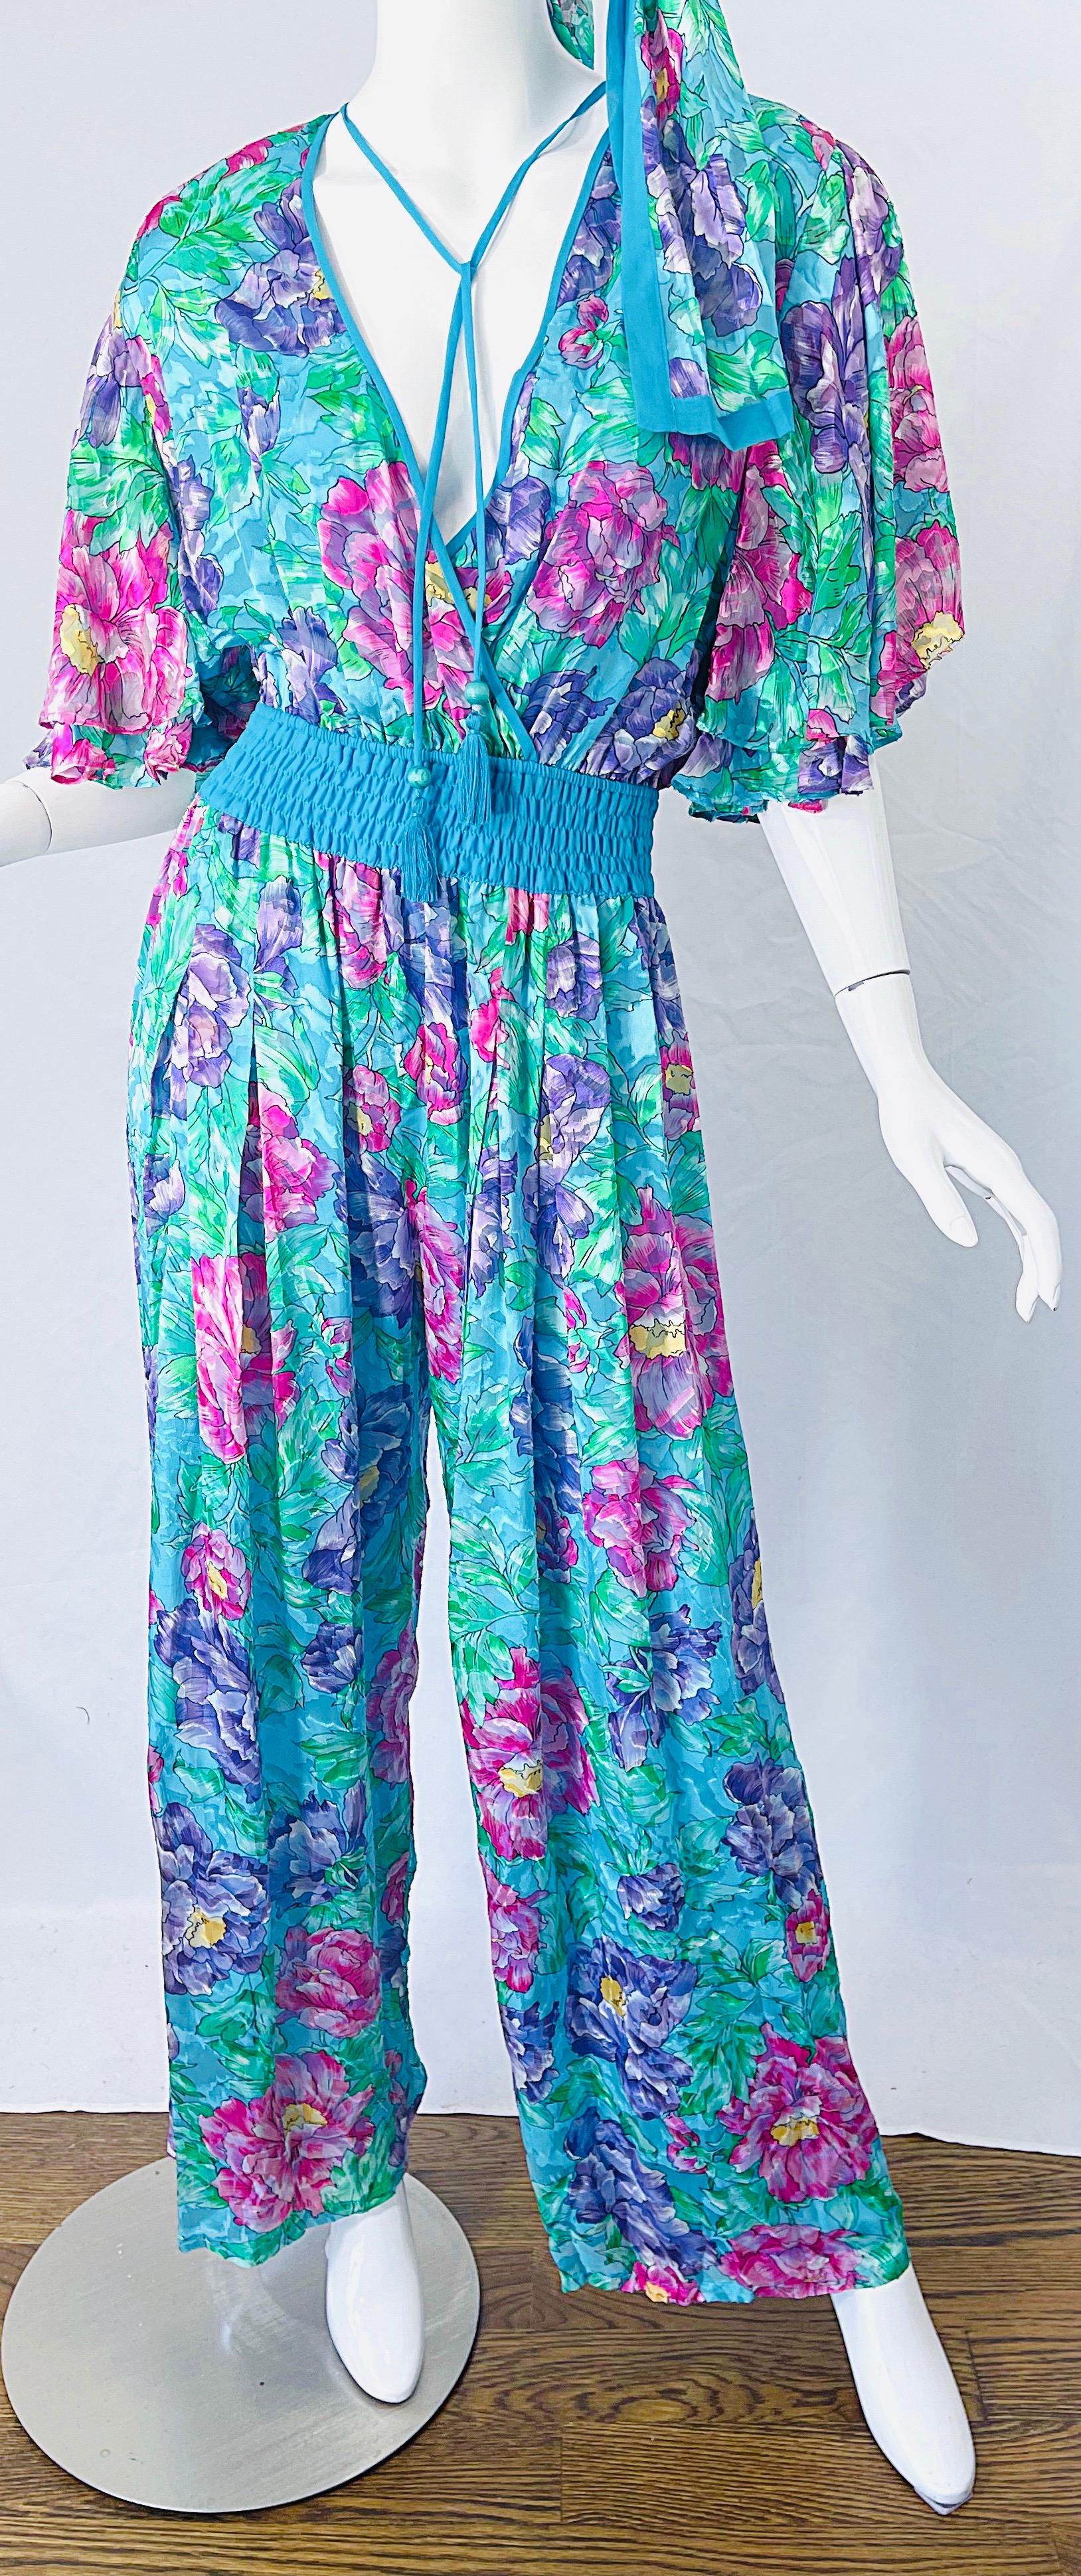 Chic and stylish brand new never worn with tags / deadstock DIANE FREIS mid 1980s silk and rayon wide leg  jumpsuit ! Features a luxurious silk blend flower printed fabric in teal, green, blue, pink, purple, yellow and white throughout. Tassels at